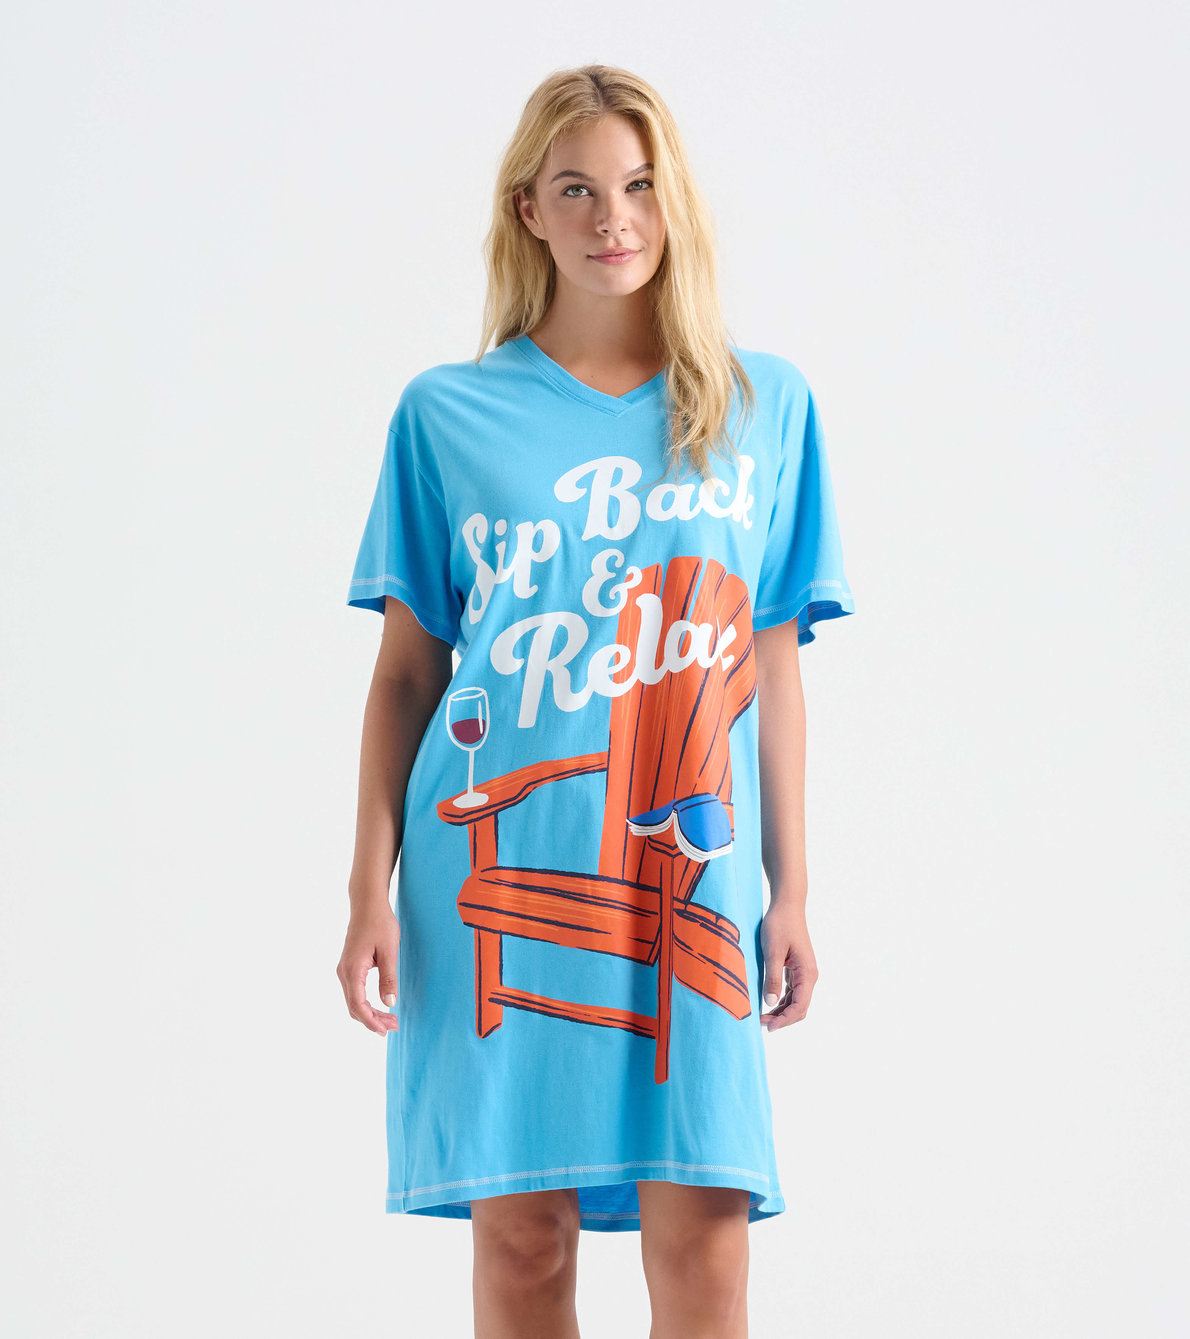 View larger image of Sip Back and Relax Women's Sleepshirt